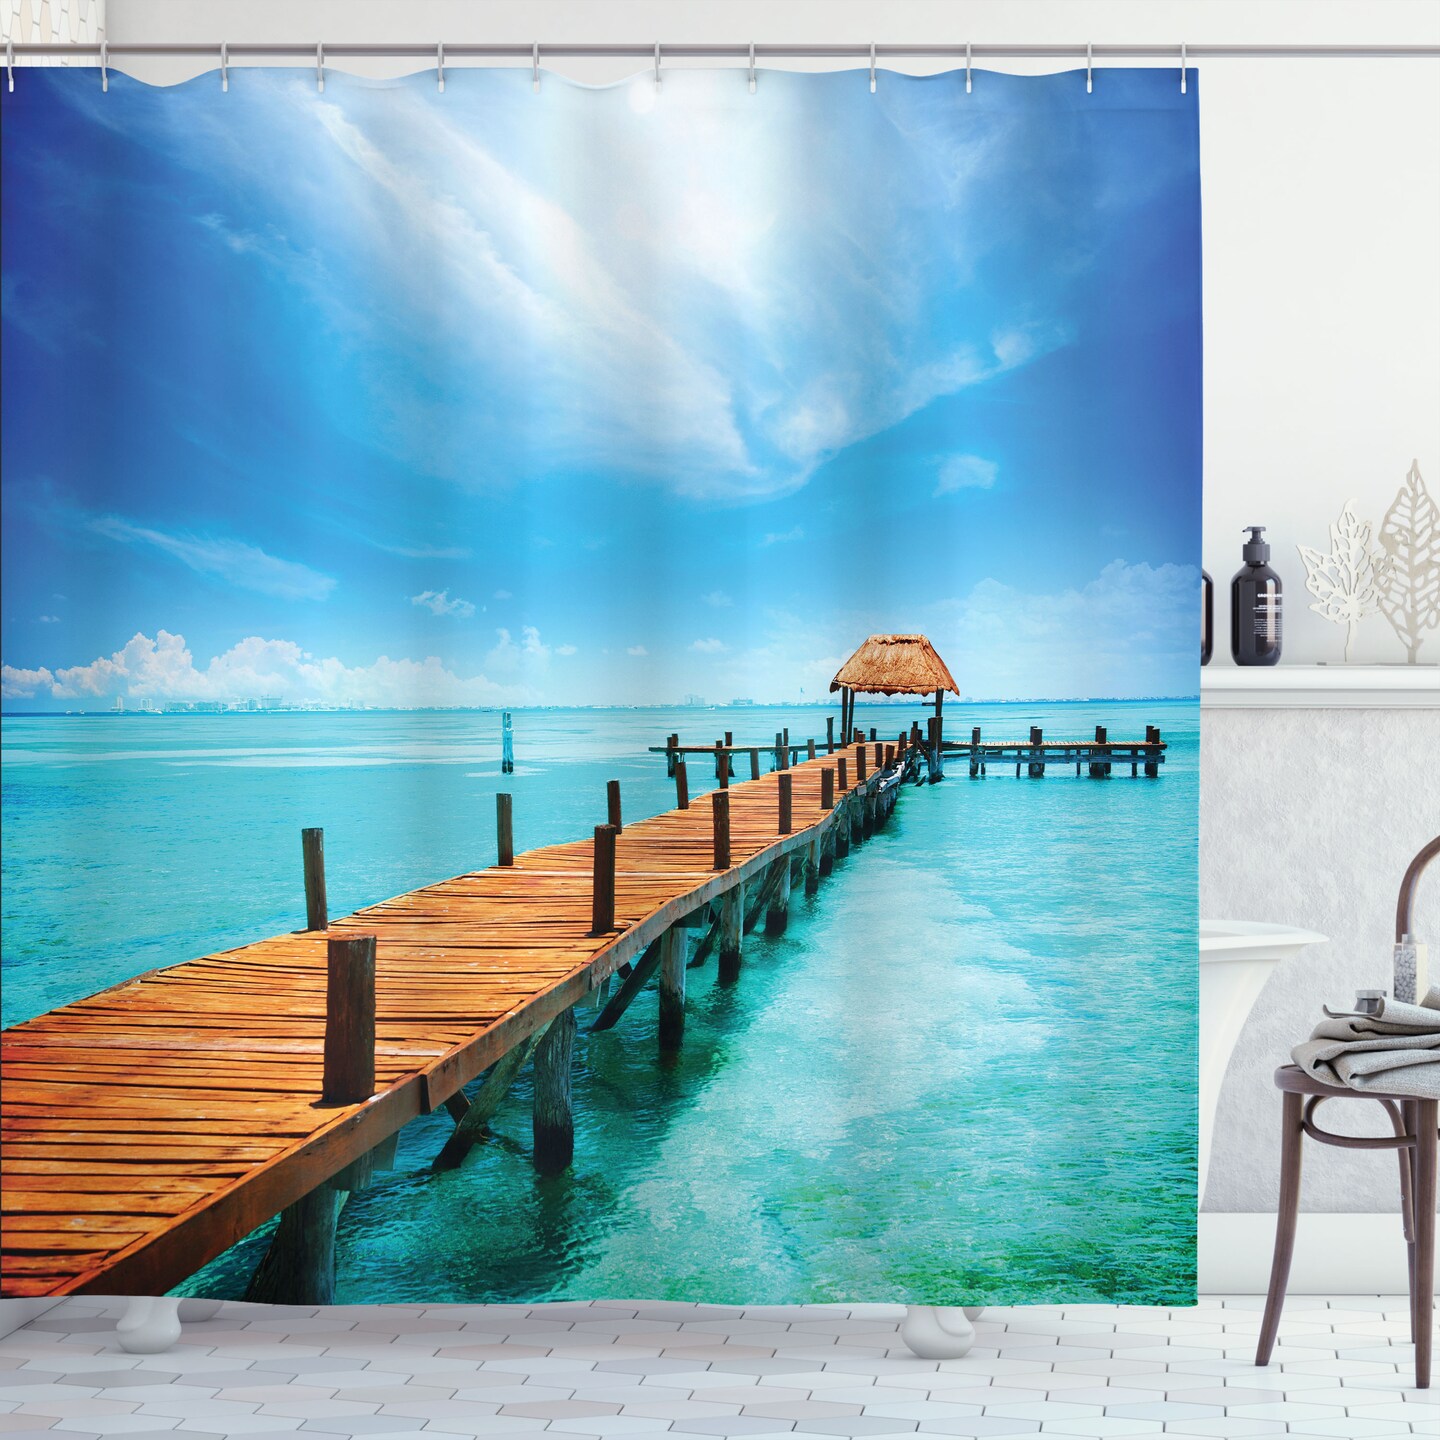 Ambesonne Tropical Shower Curtain, Exotic Hawaiian Wooden Pier